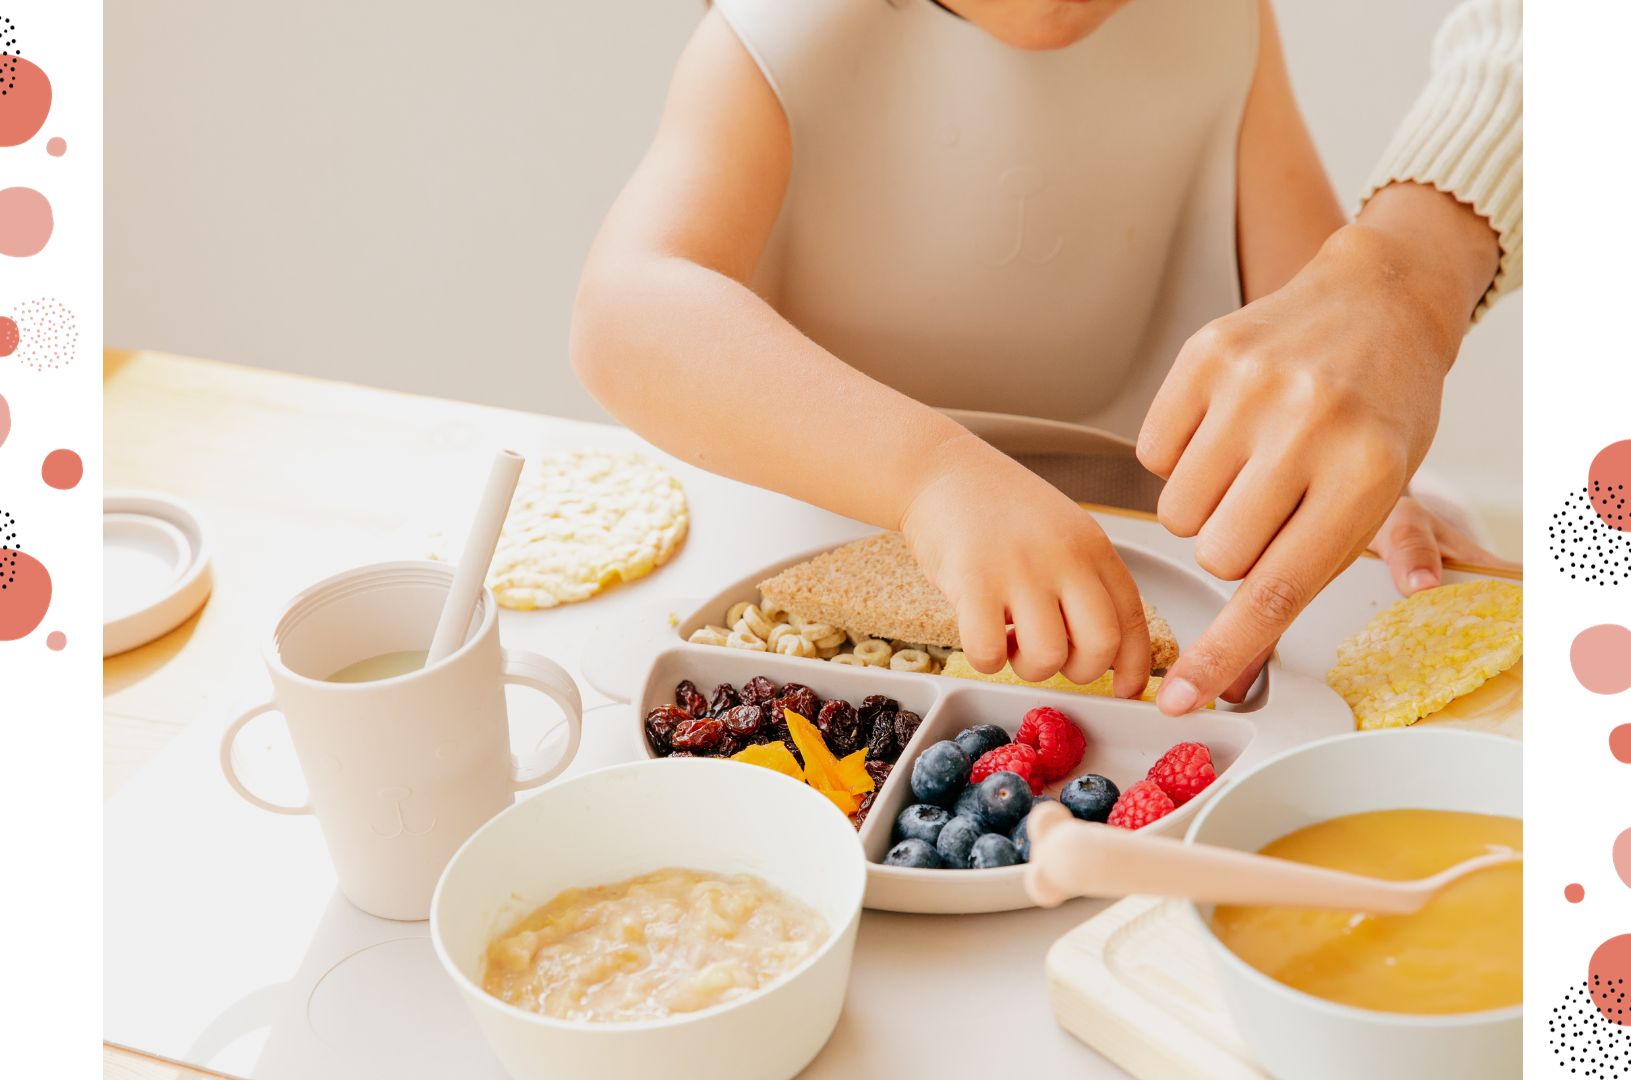 Why Breakfast Is Crucial Before an Exciting Day